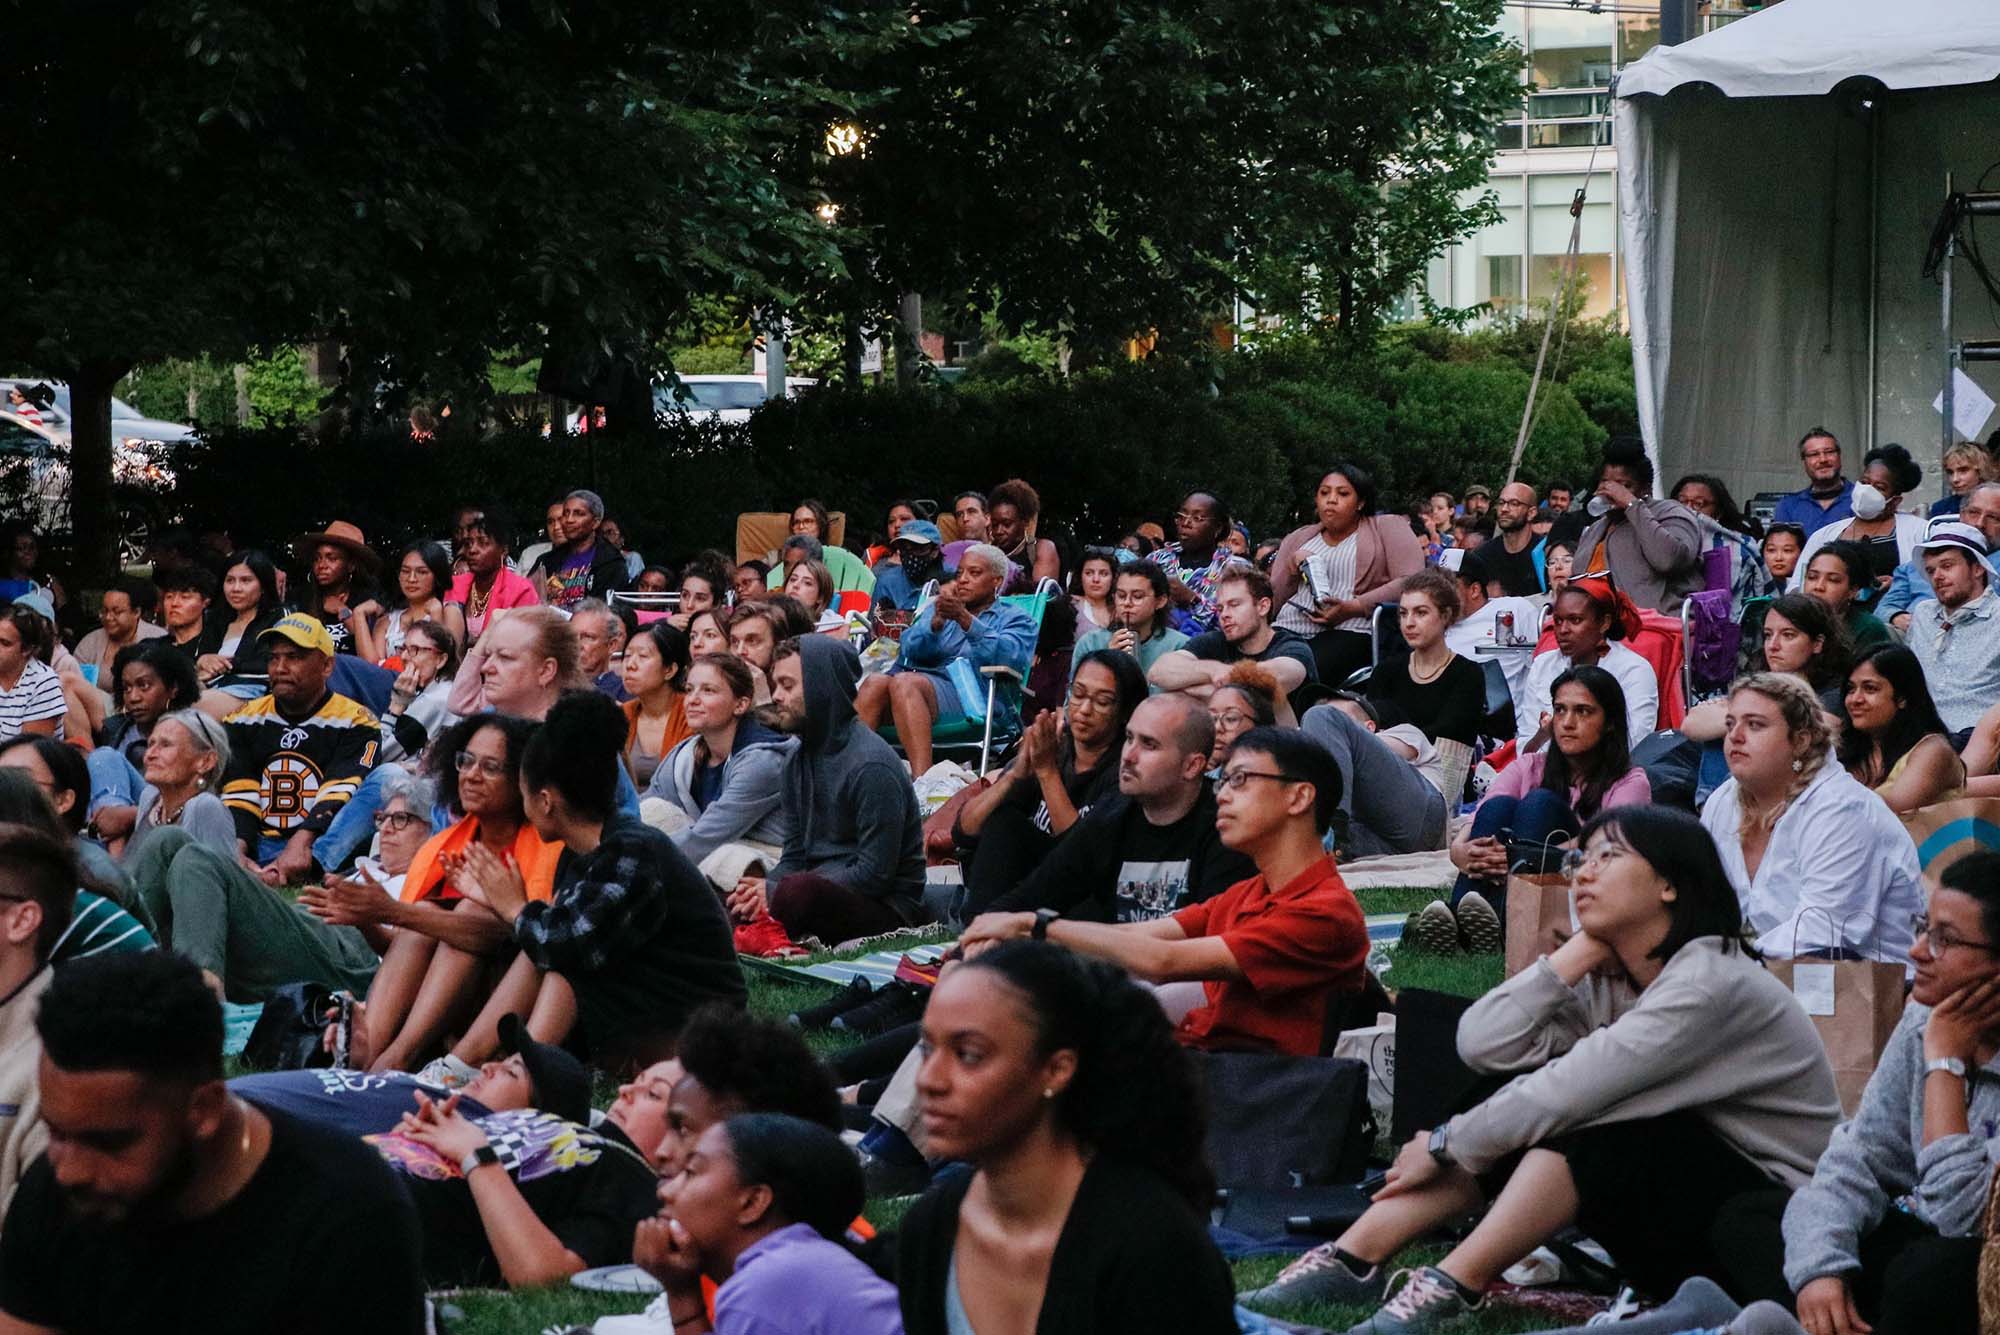 Photo: A picture of people sitting outside and watching a film during a film festival